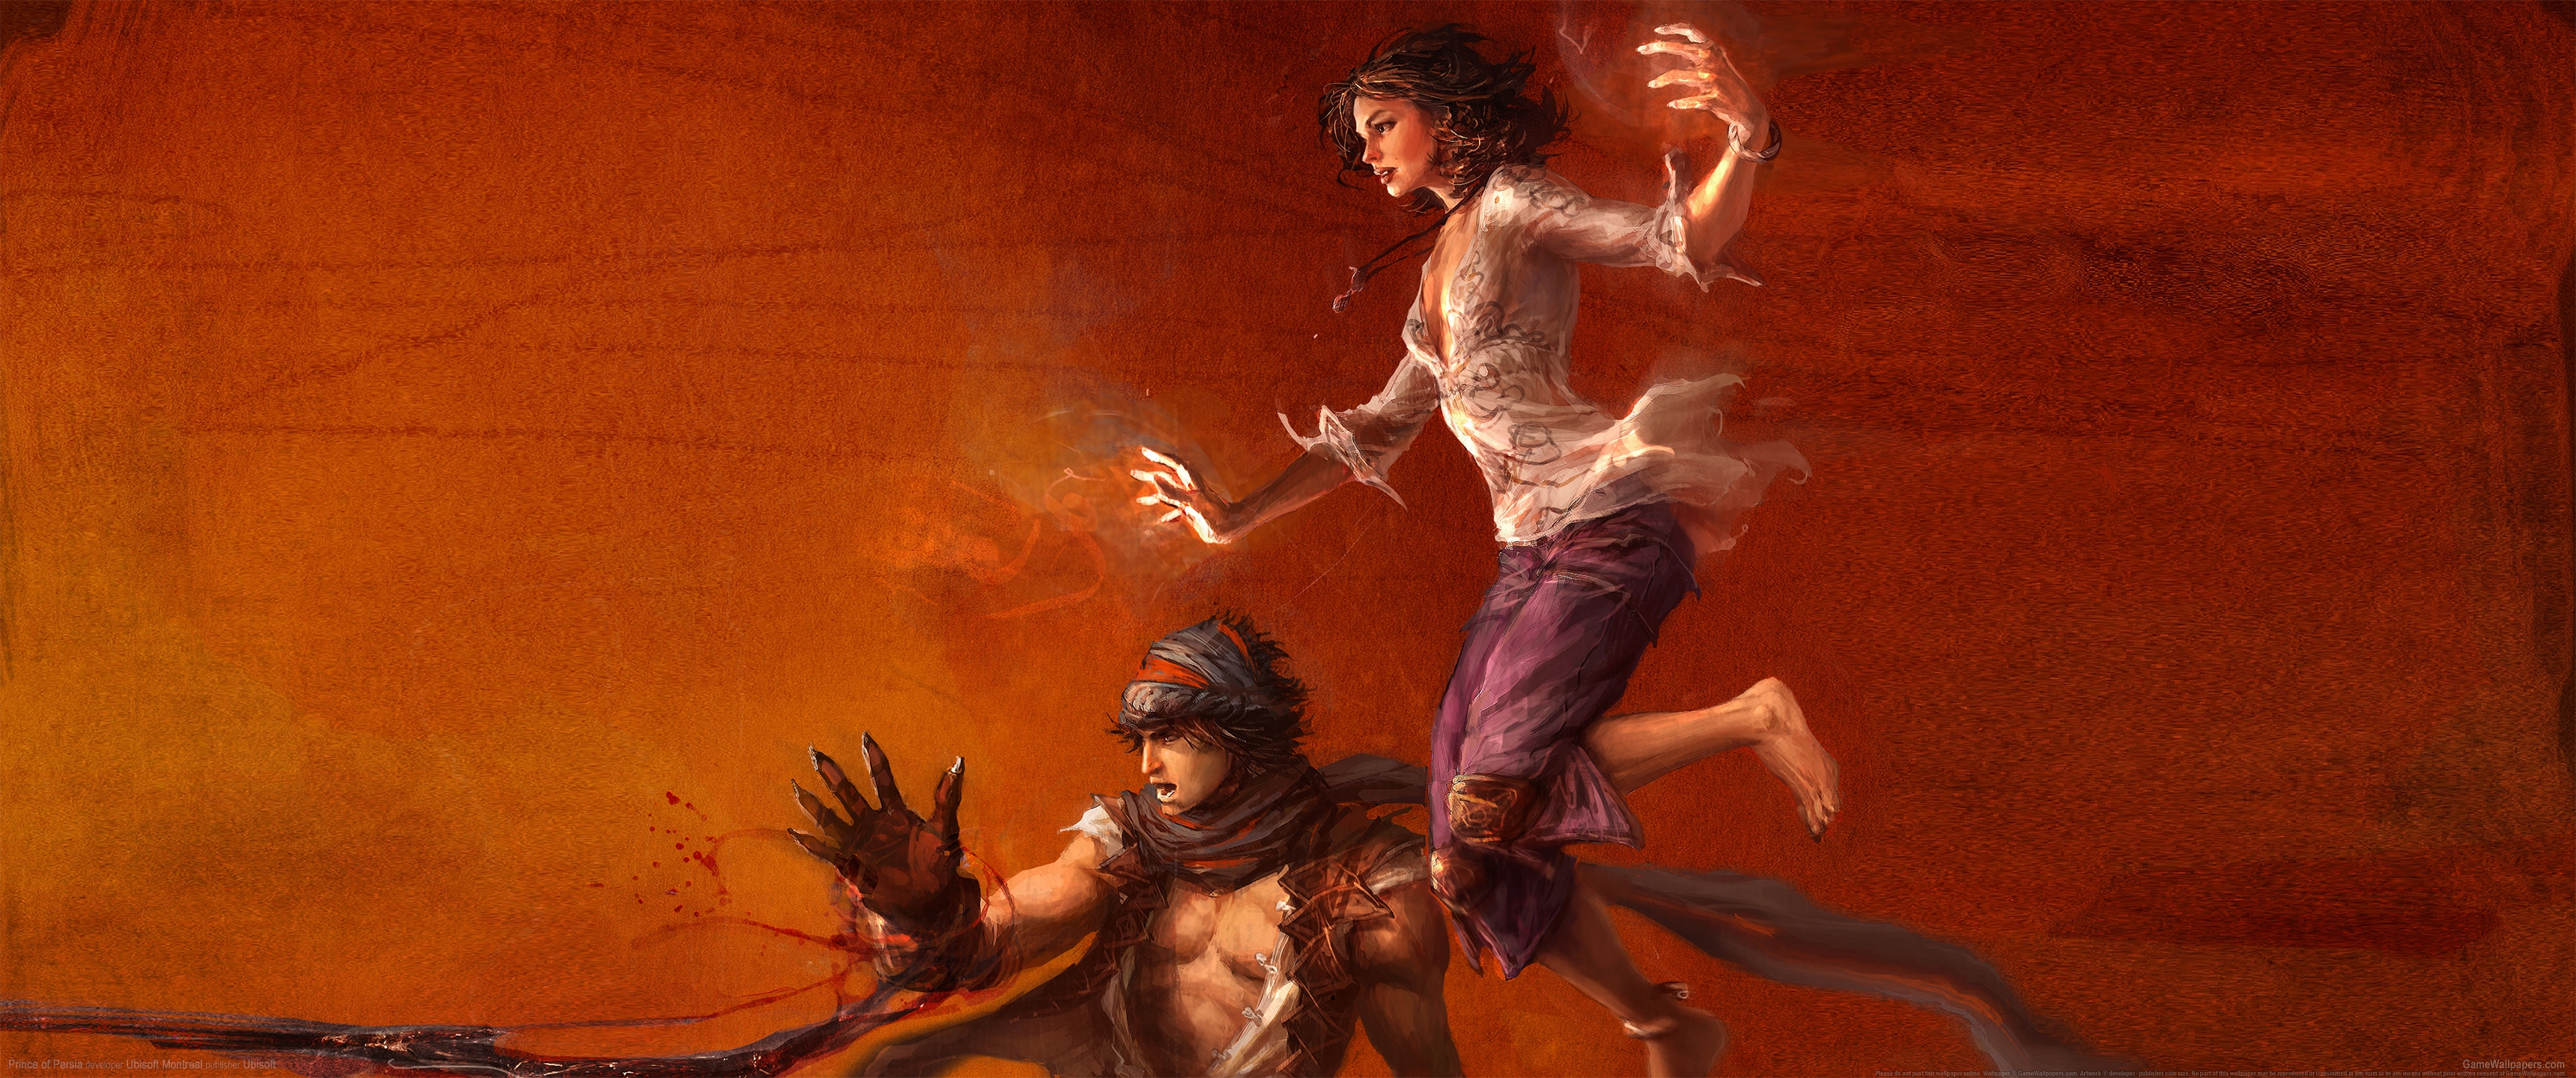 Prince of Persia 3440x1440 achtergrond 07